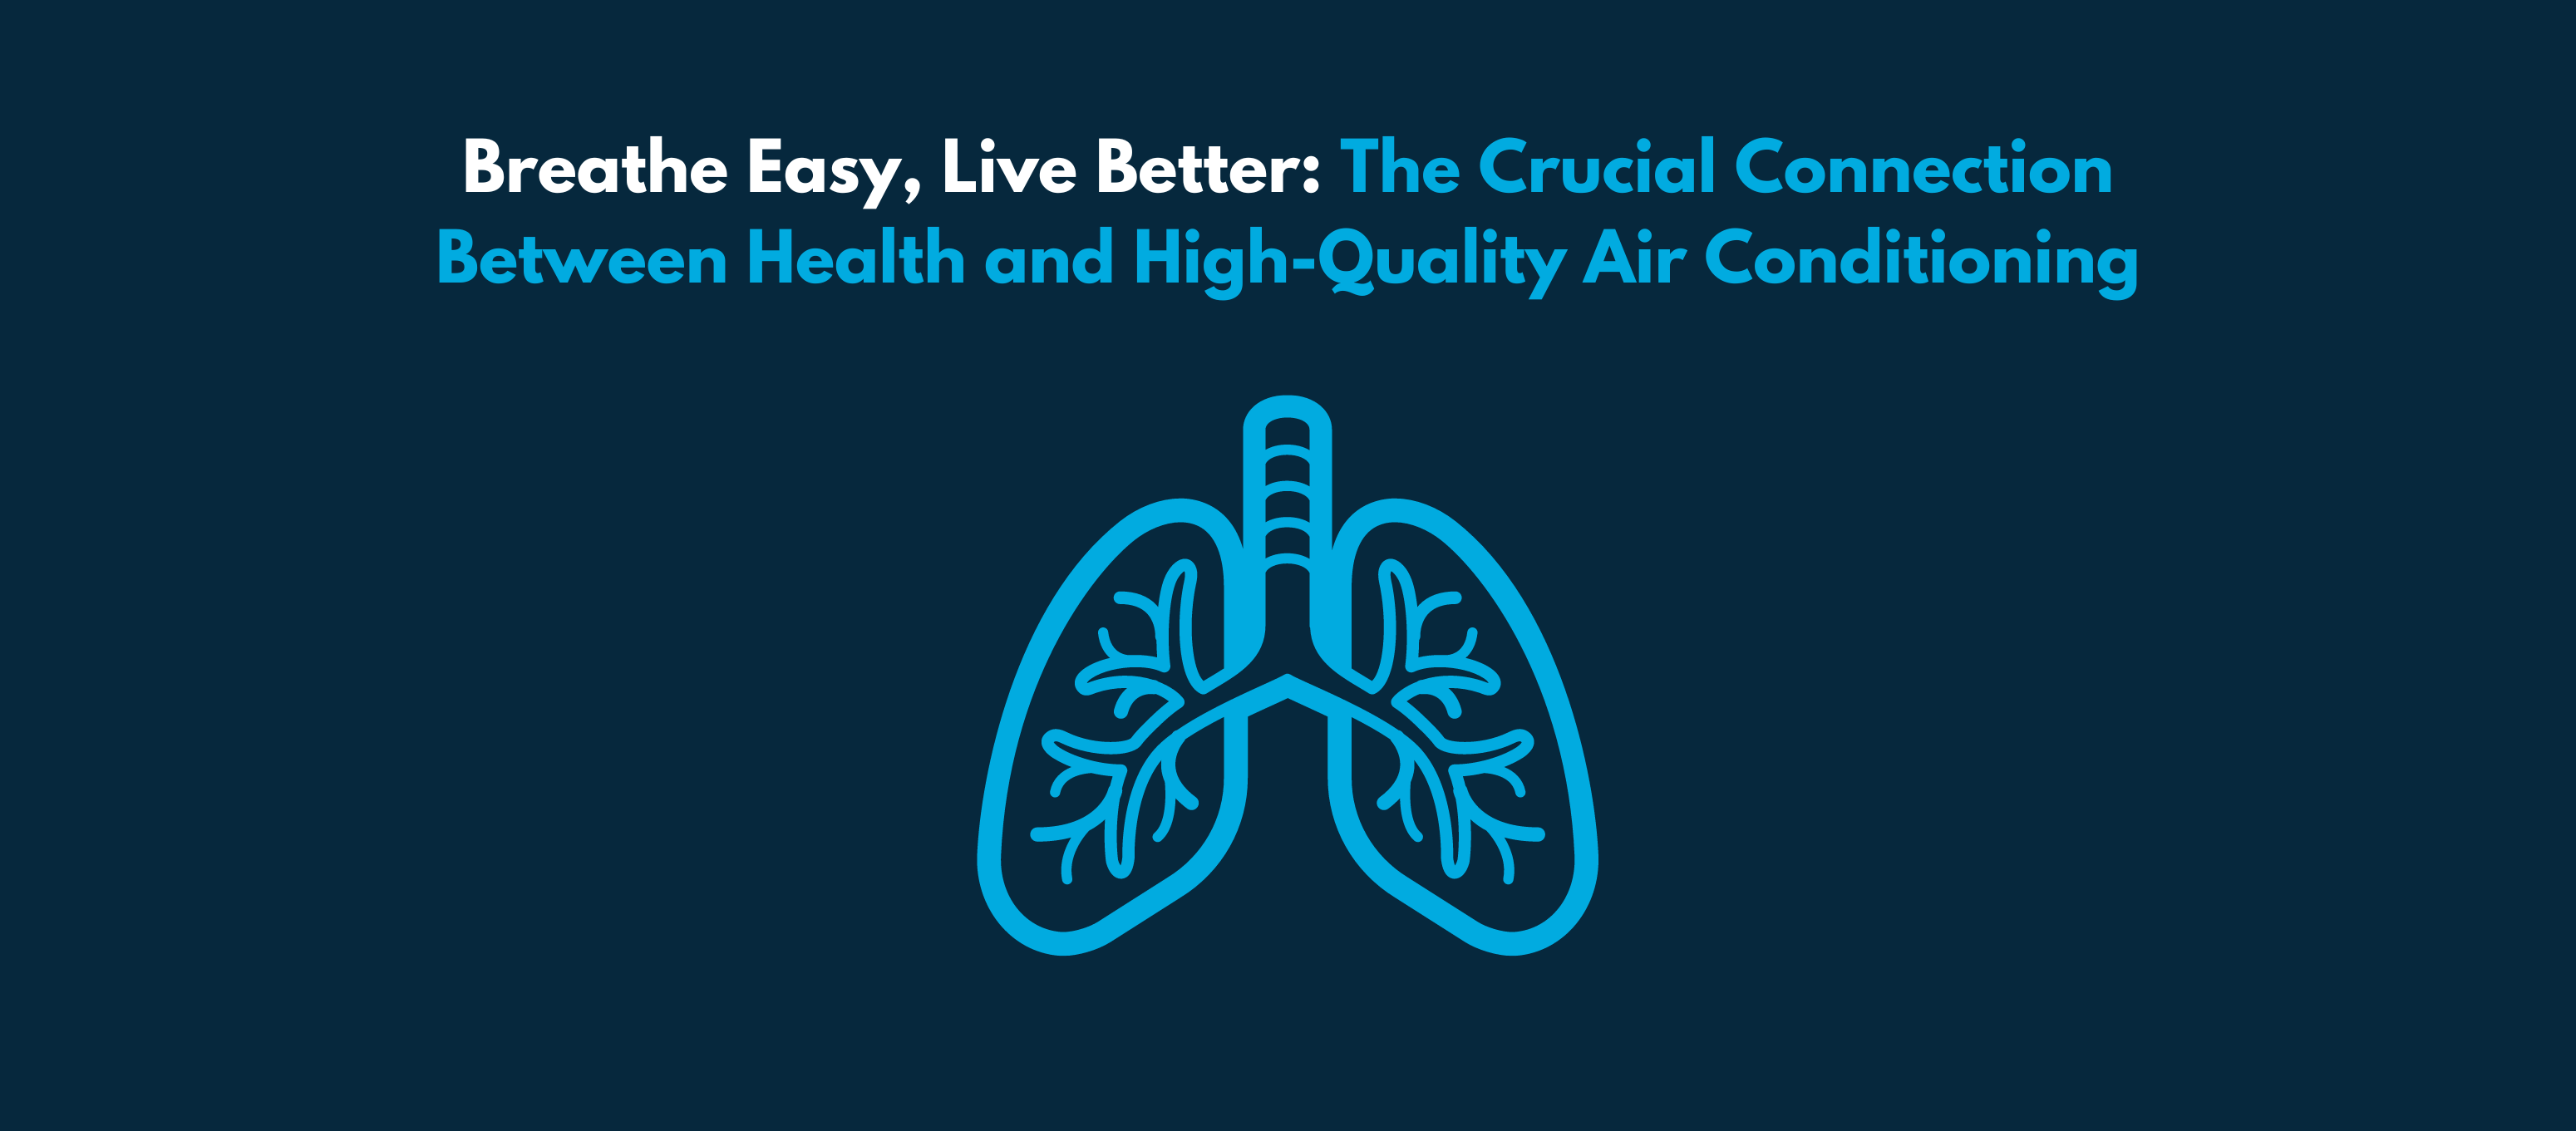 Breathe Easy, Live Better: The Crucial Connection Between Health and High-Quality Air Conditioning